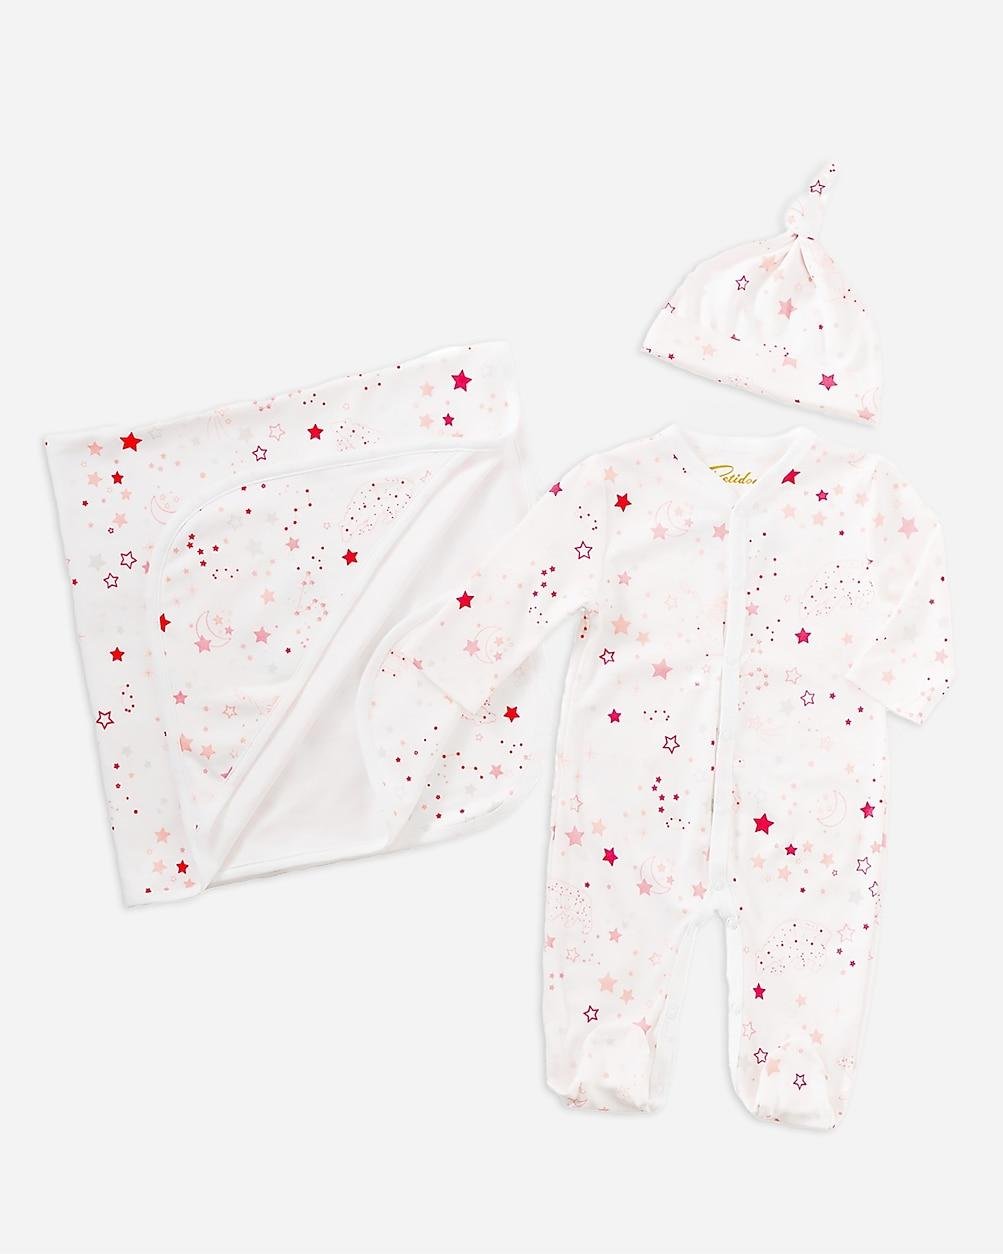 Petidoux babies' Pima cotton one-piece, matching hat and receiving blanket set by J.CREW